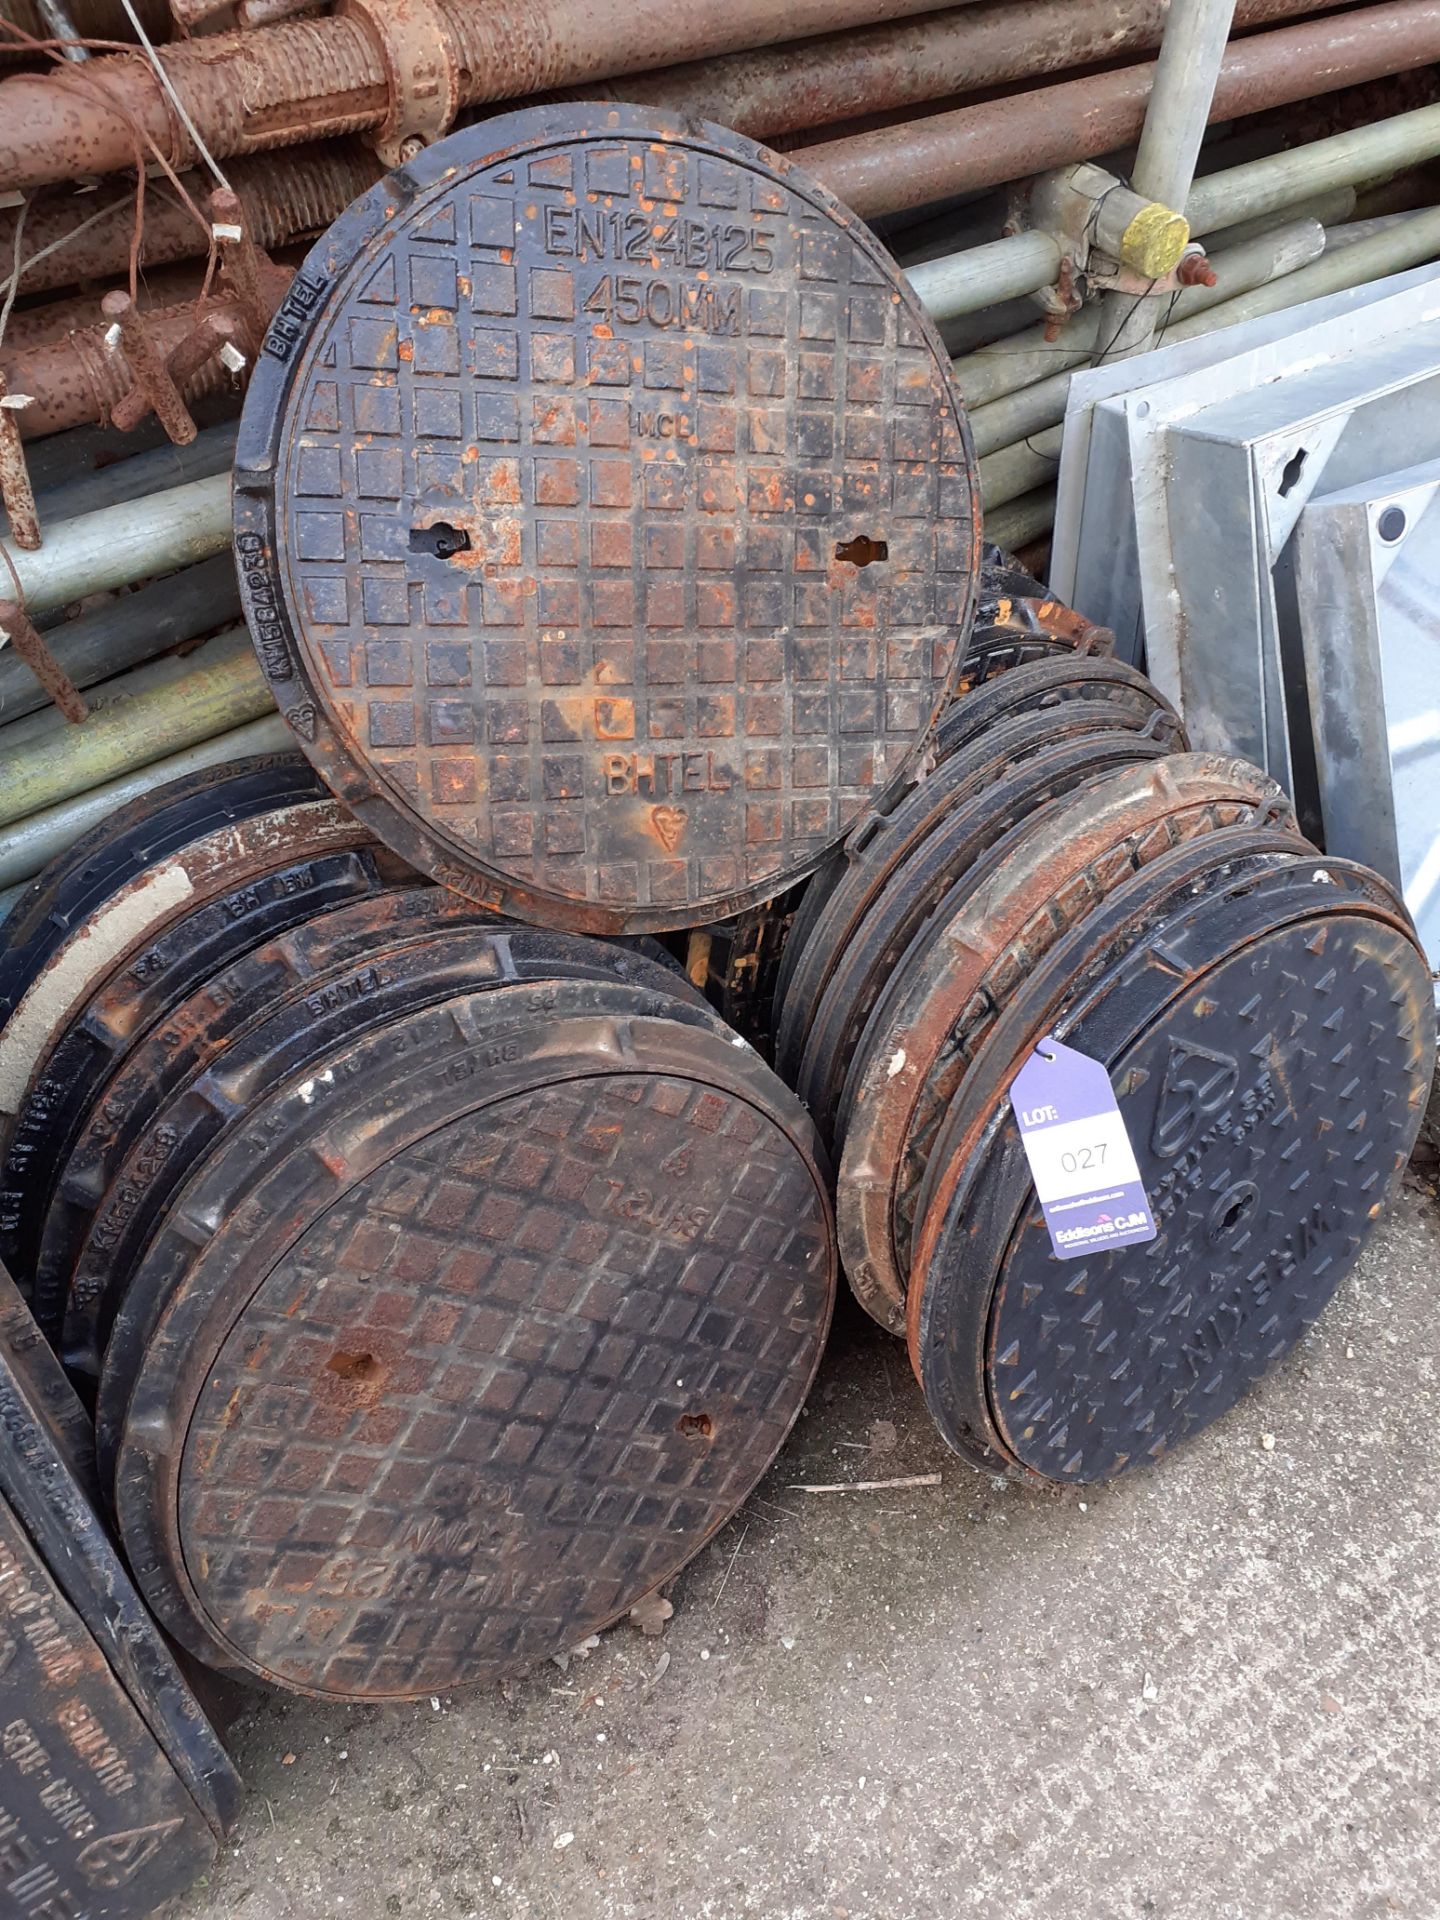 Approx. 30 Manhole Covers, Plastic Manholes & Plastic Inspection Chambers